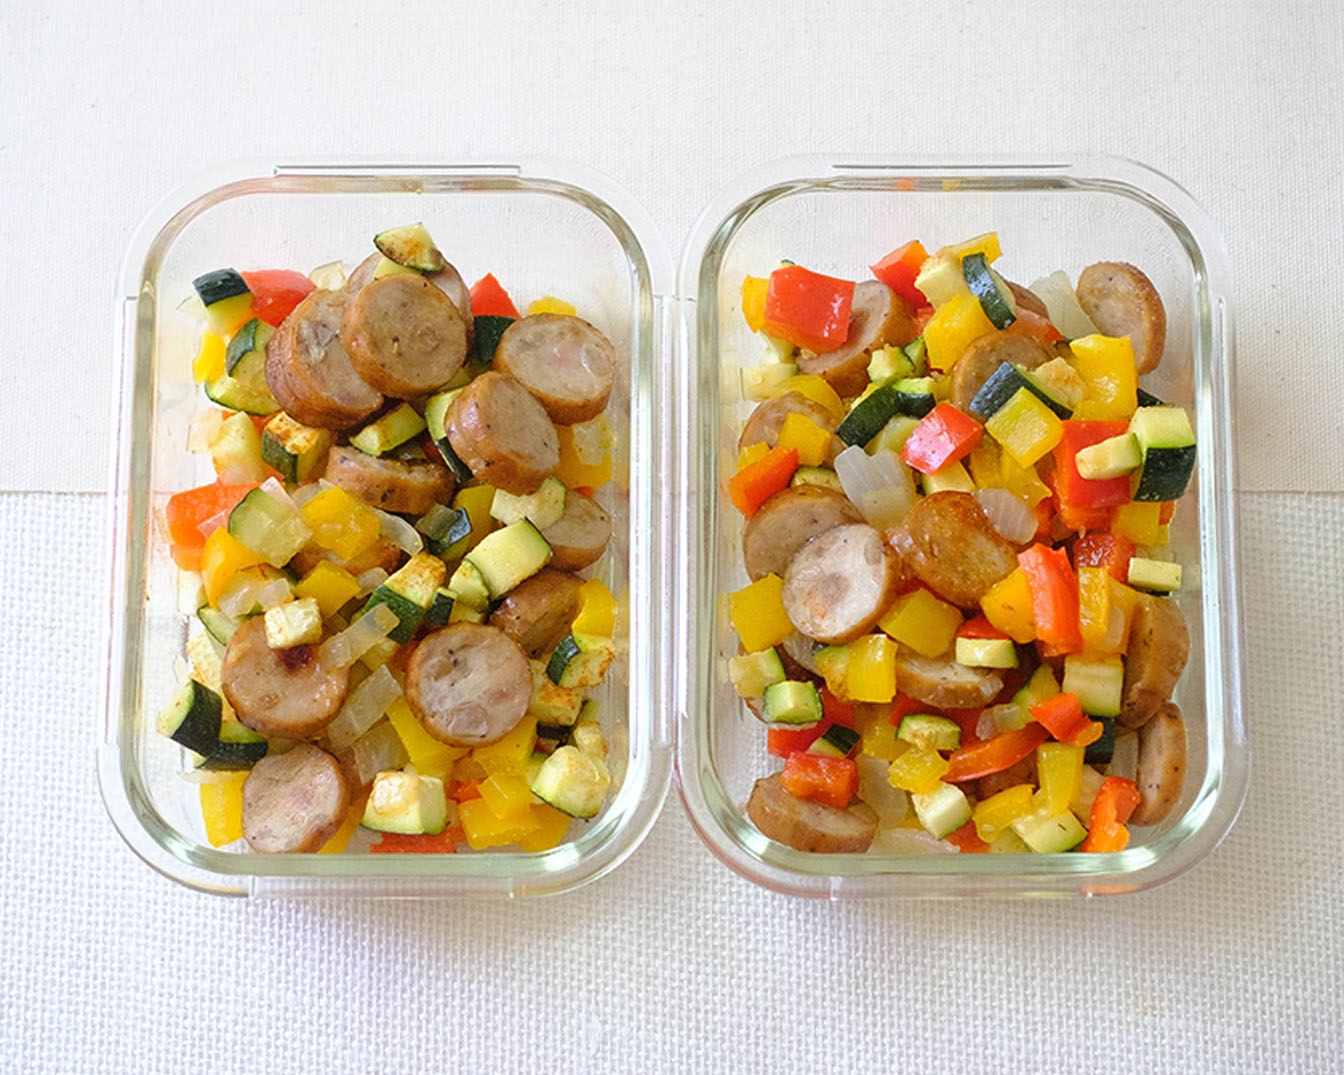 rectangular glass meal prep containers with sliced sausage and diced zucchini, bell peppers, and red onions